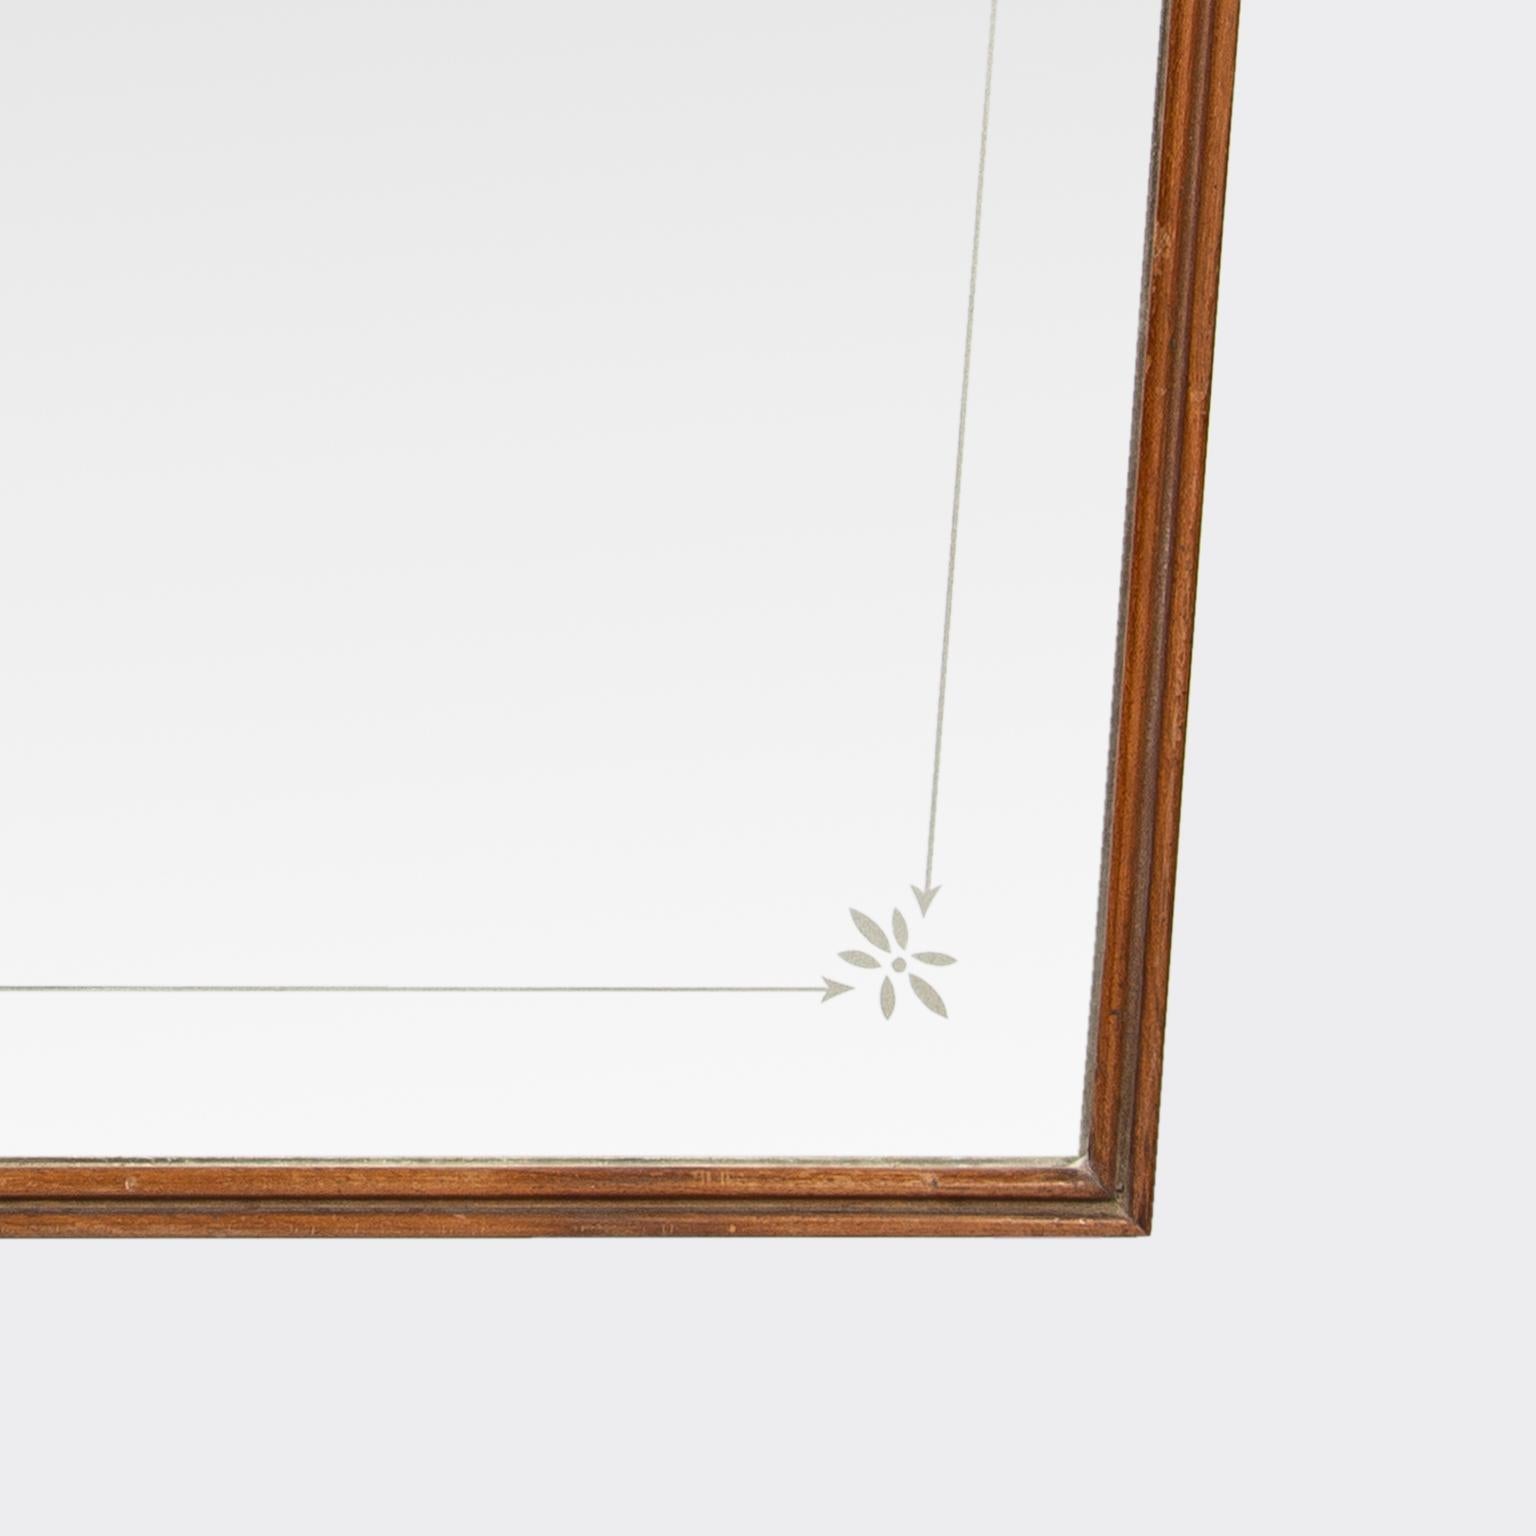 Mahogany Italian Etched Design Mirror For Sale